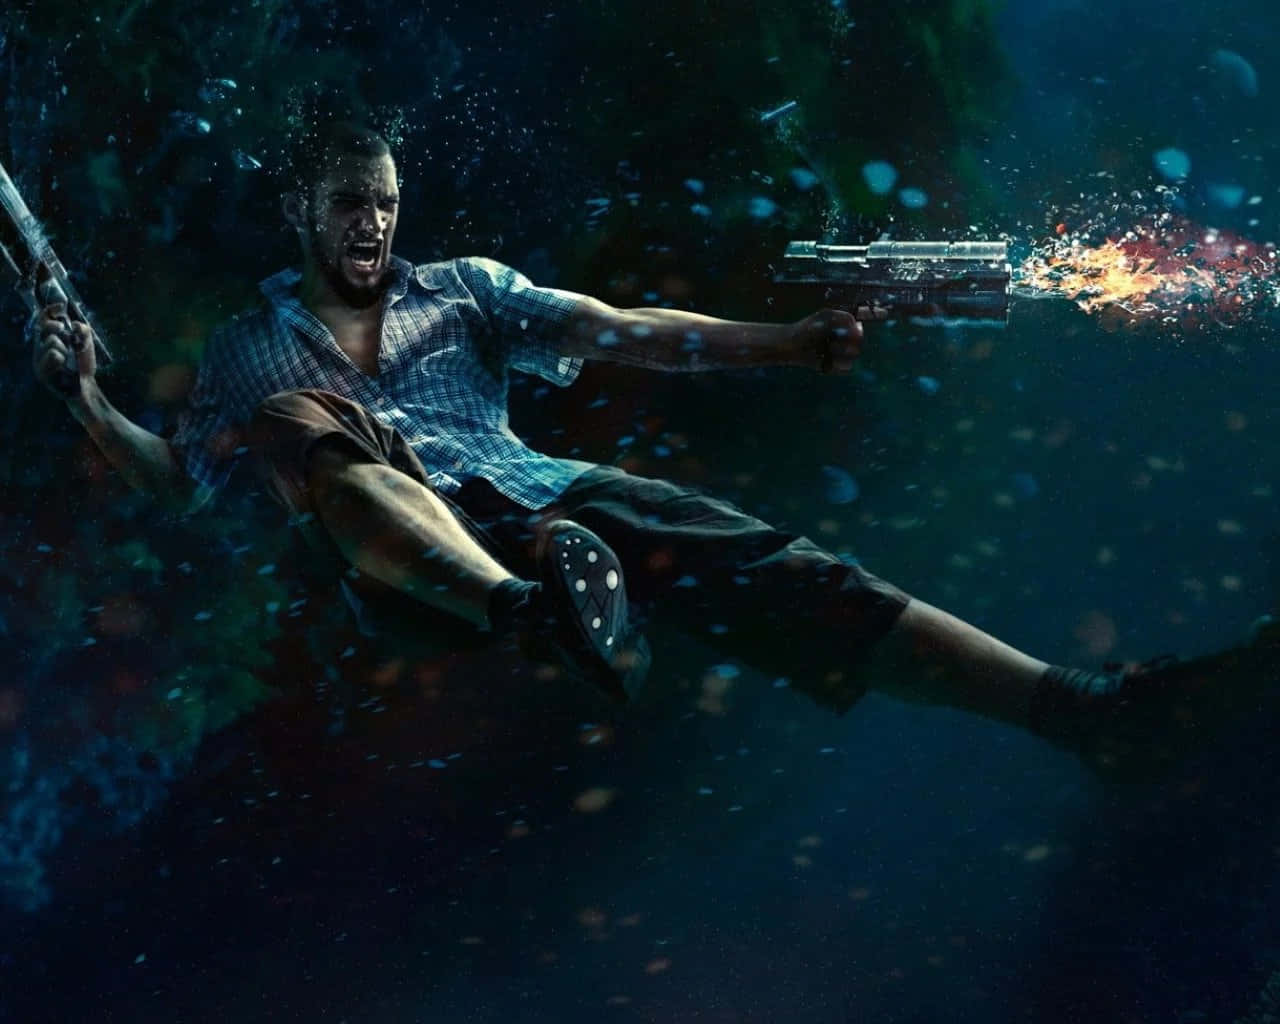 A Man Is Holding A Gun In The Water